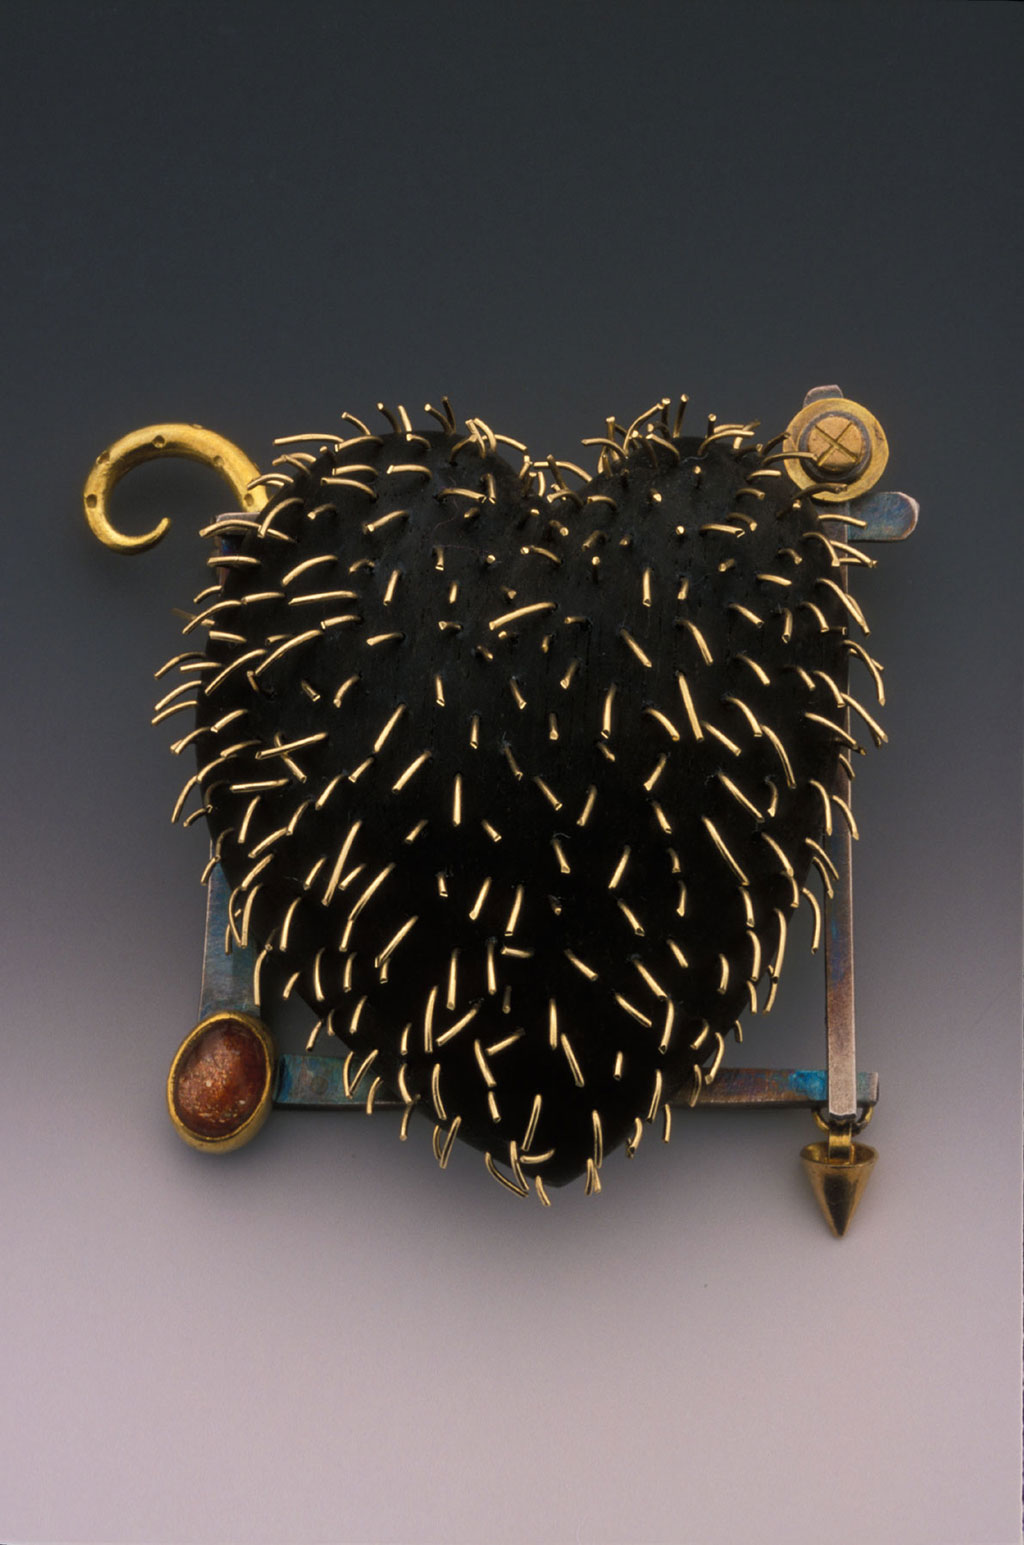 Susan Chin, Hoary Heart Brooch, 2006. George Post photograph